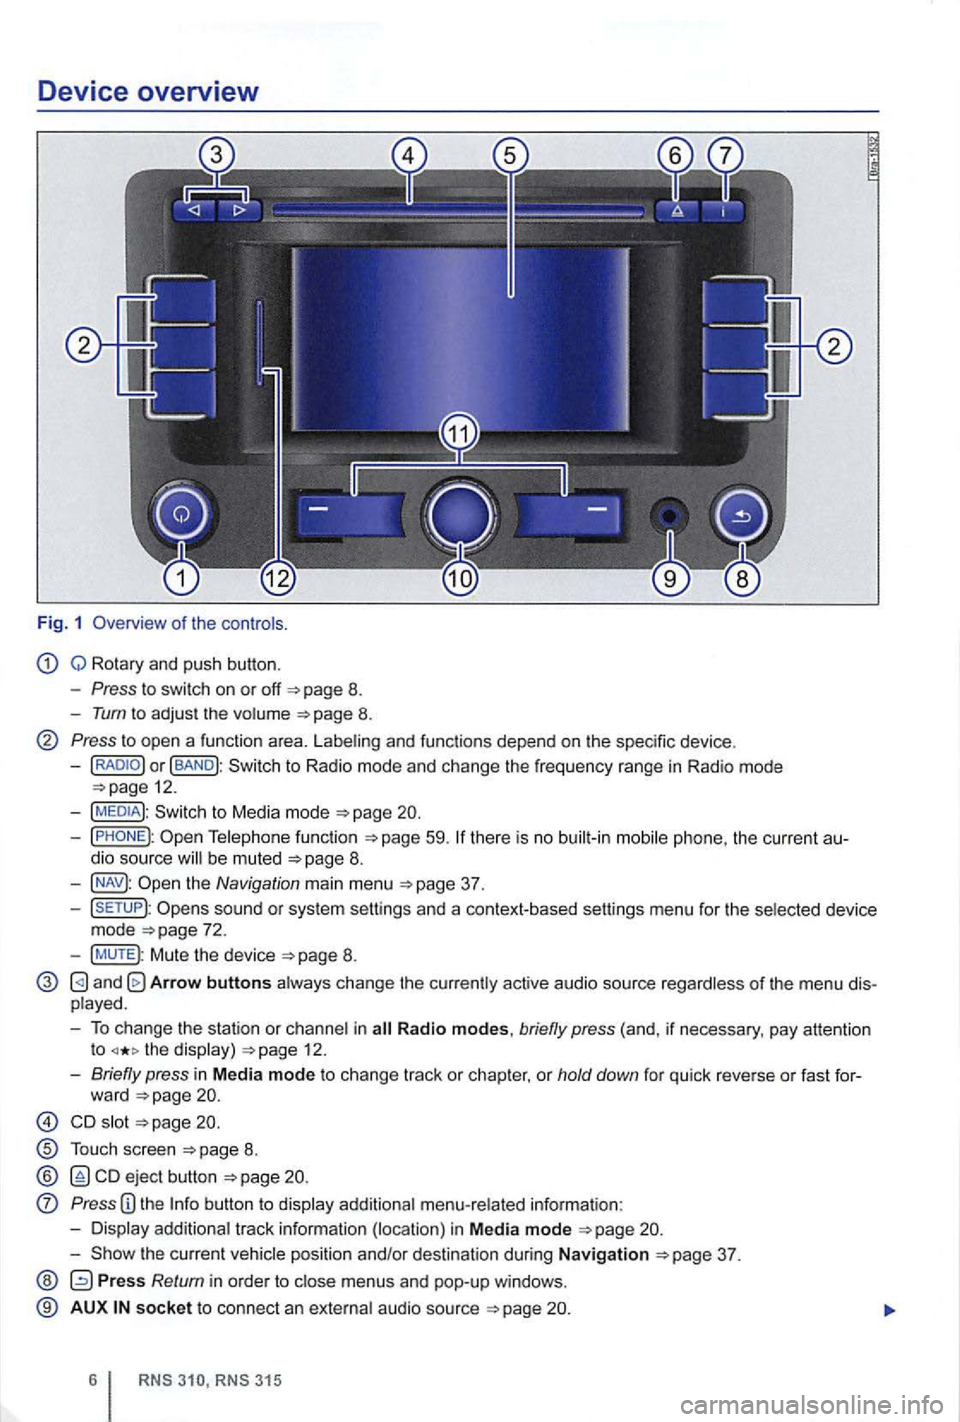 VOLKSWAGEN GOLF 2009  Owners Manual Device overview 
Fig. 1  Overv iew  of the  co ntro ls. 
Q Rotary  and push button. 
- Press to swi tch  on or off 8. 
-Tum to adjus t the  volume 8. 
Press to open  a functio n area.  Labe ling  and 